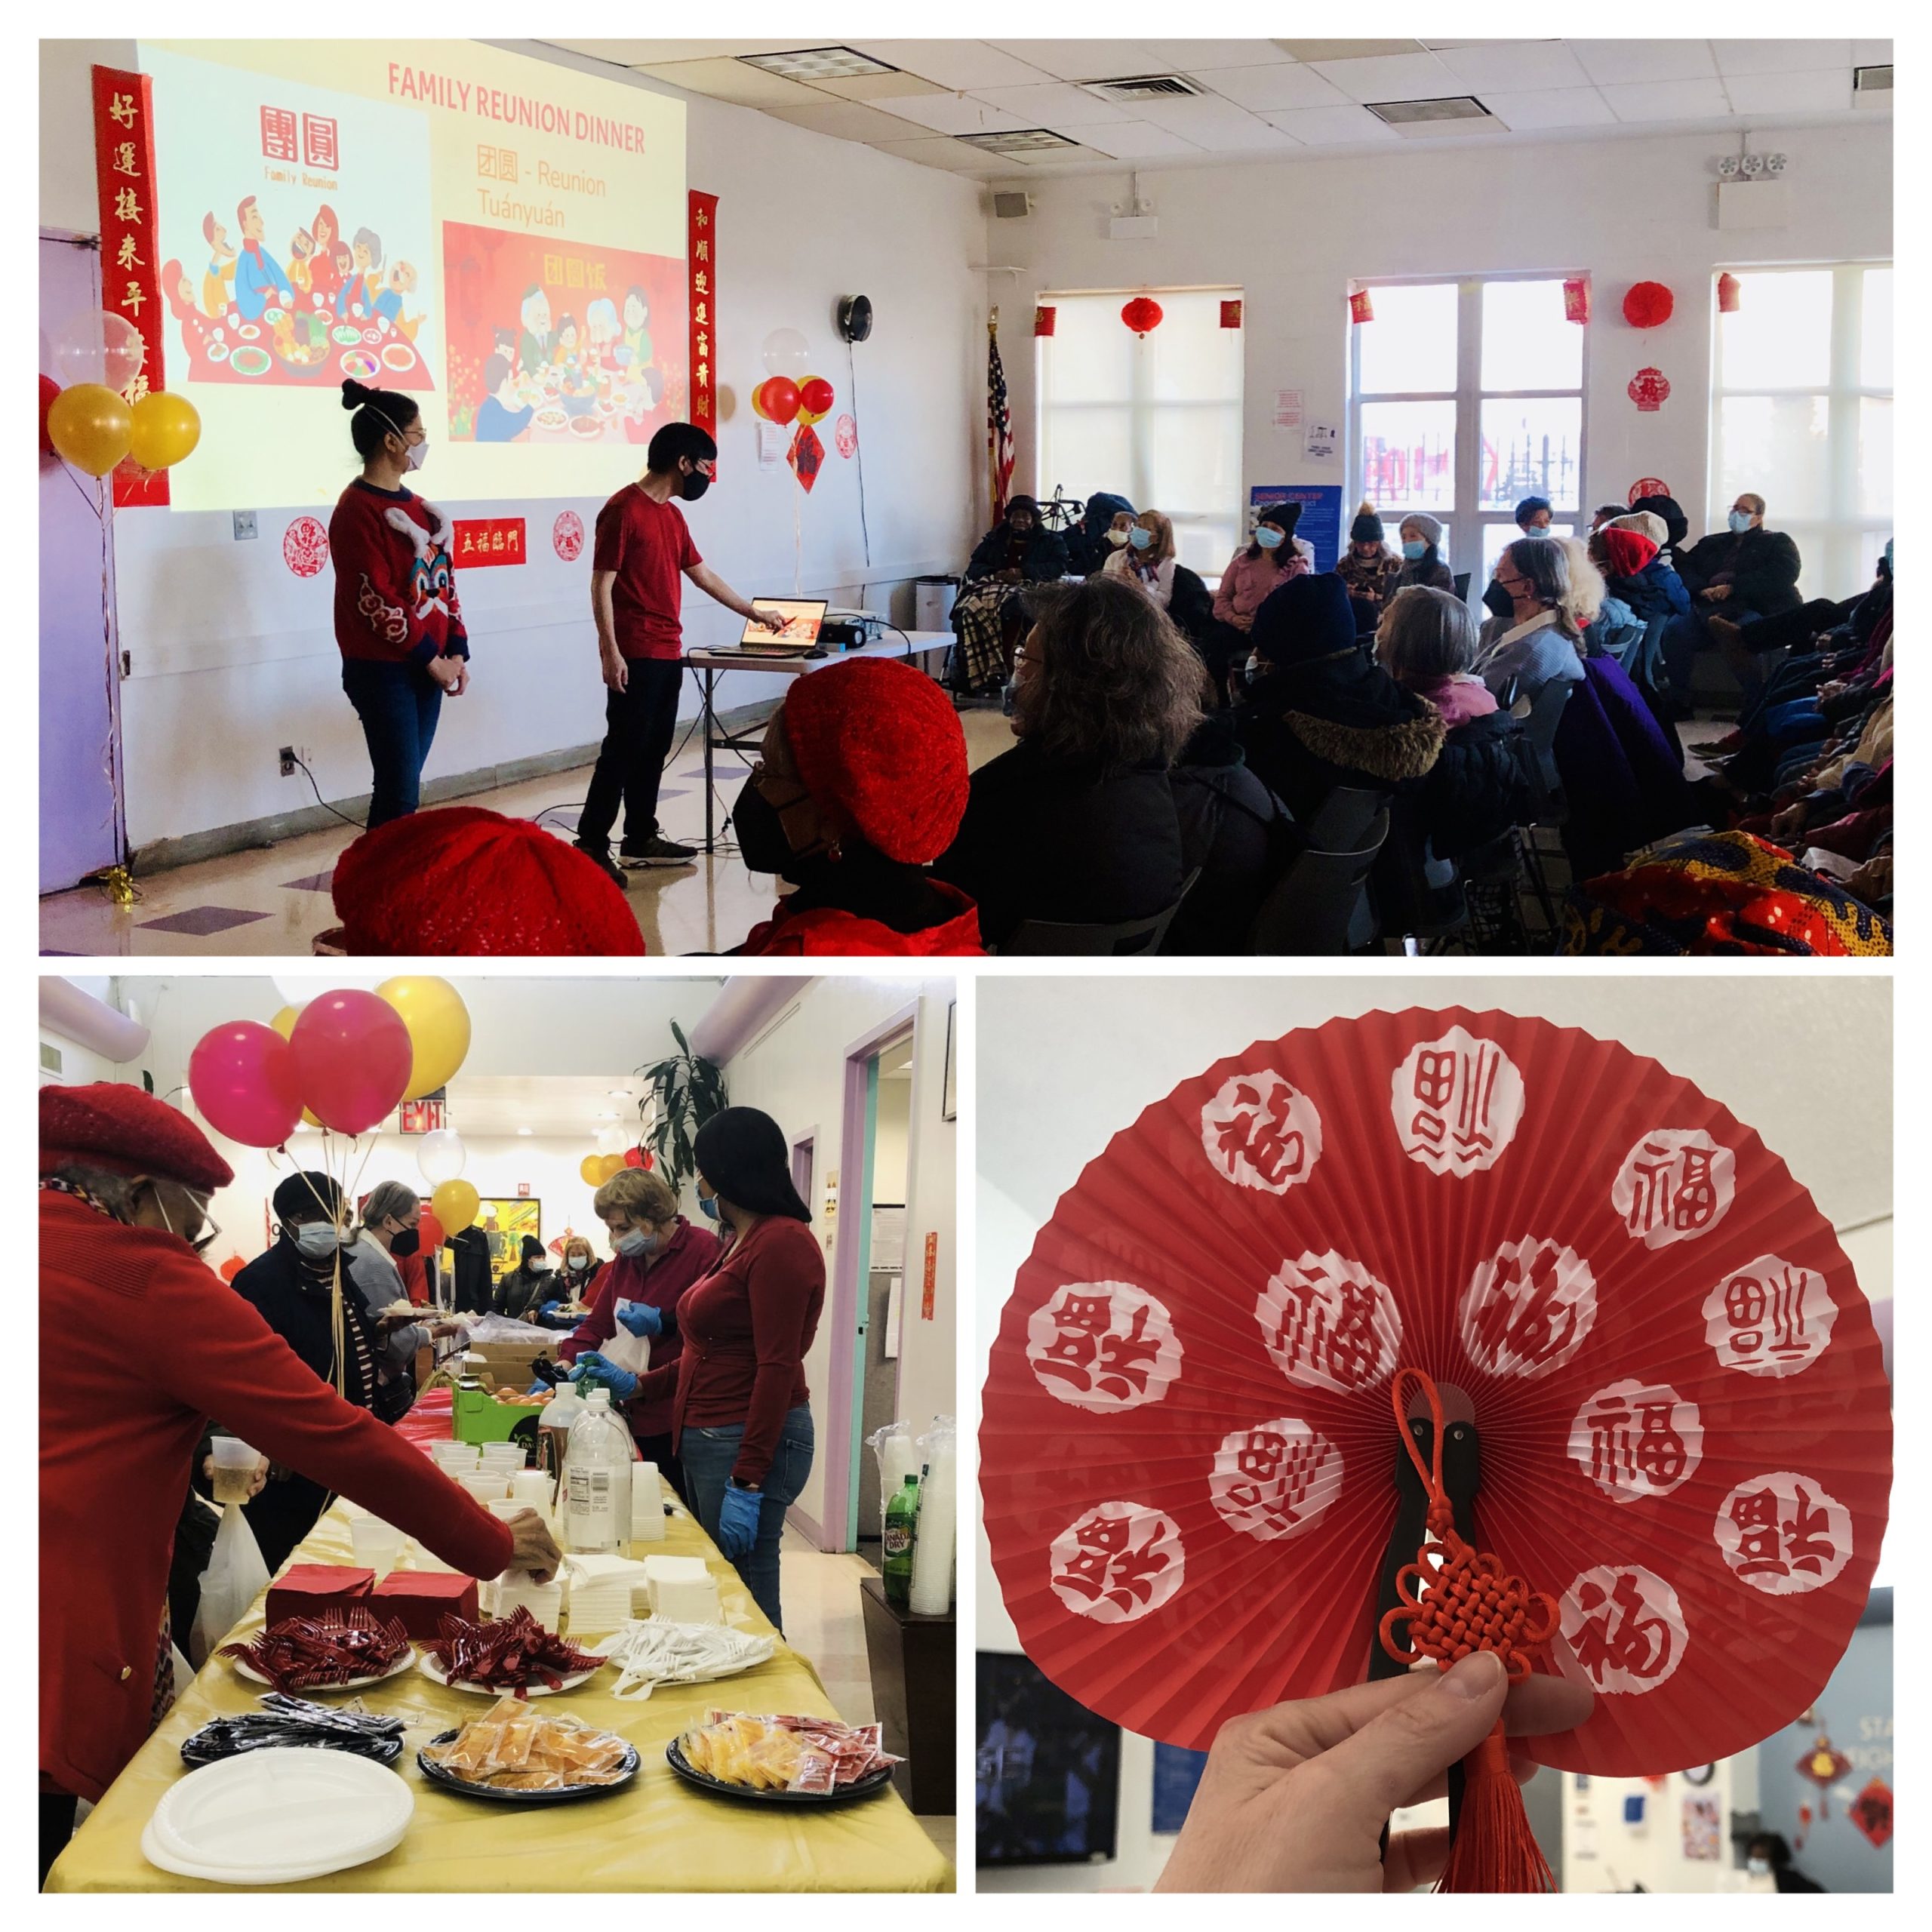 A collage showing a crowded room watching a live presentation plus people being served chinese food plus a hand holding up a red Chinese fan